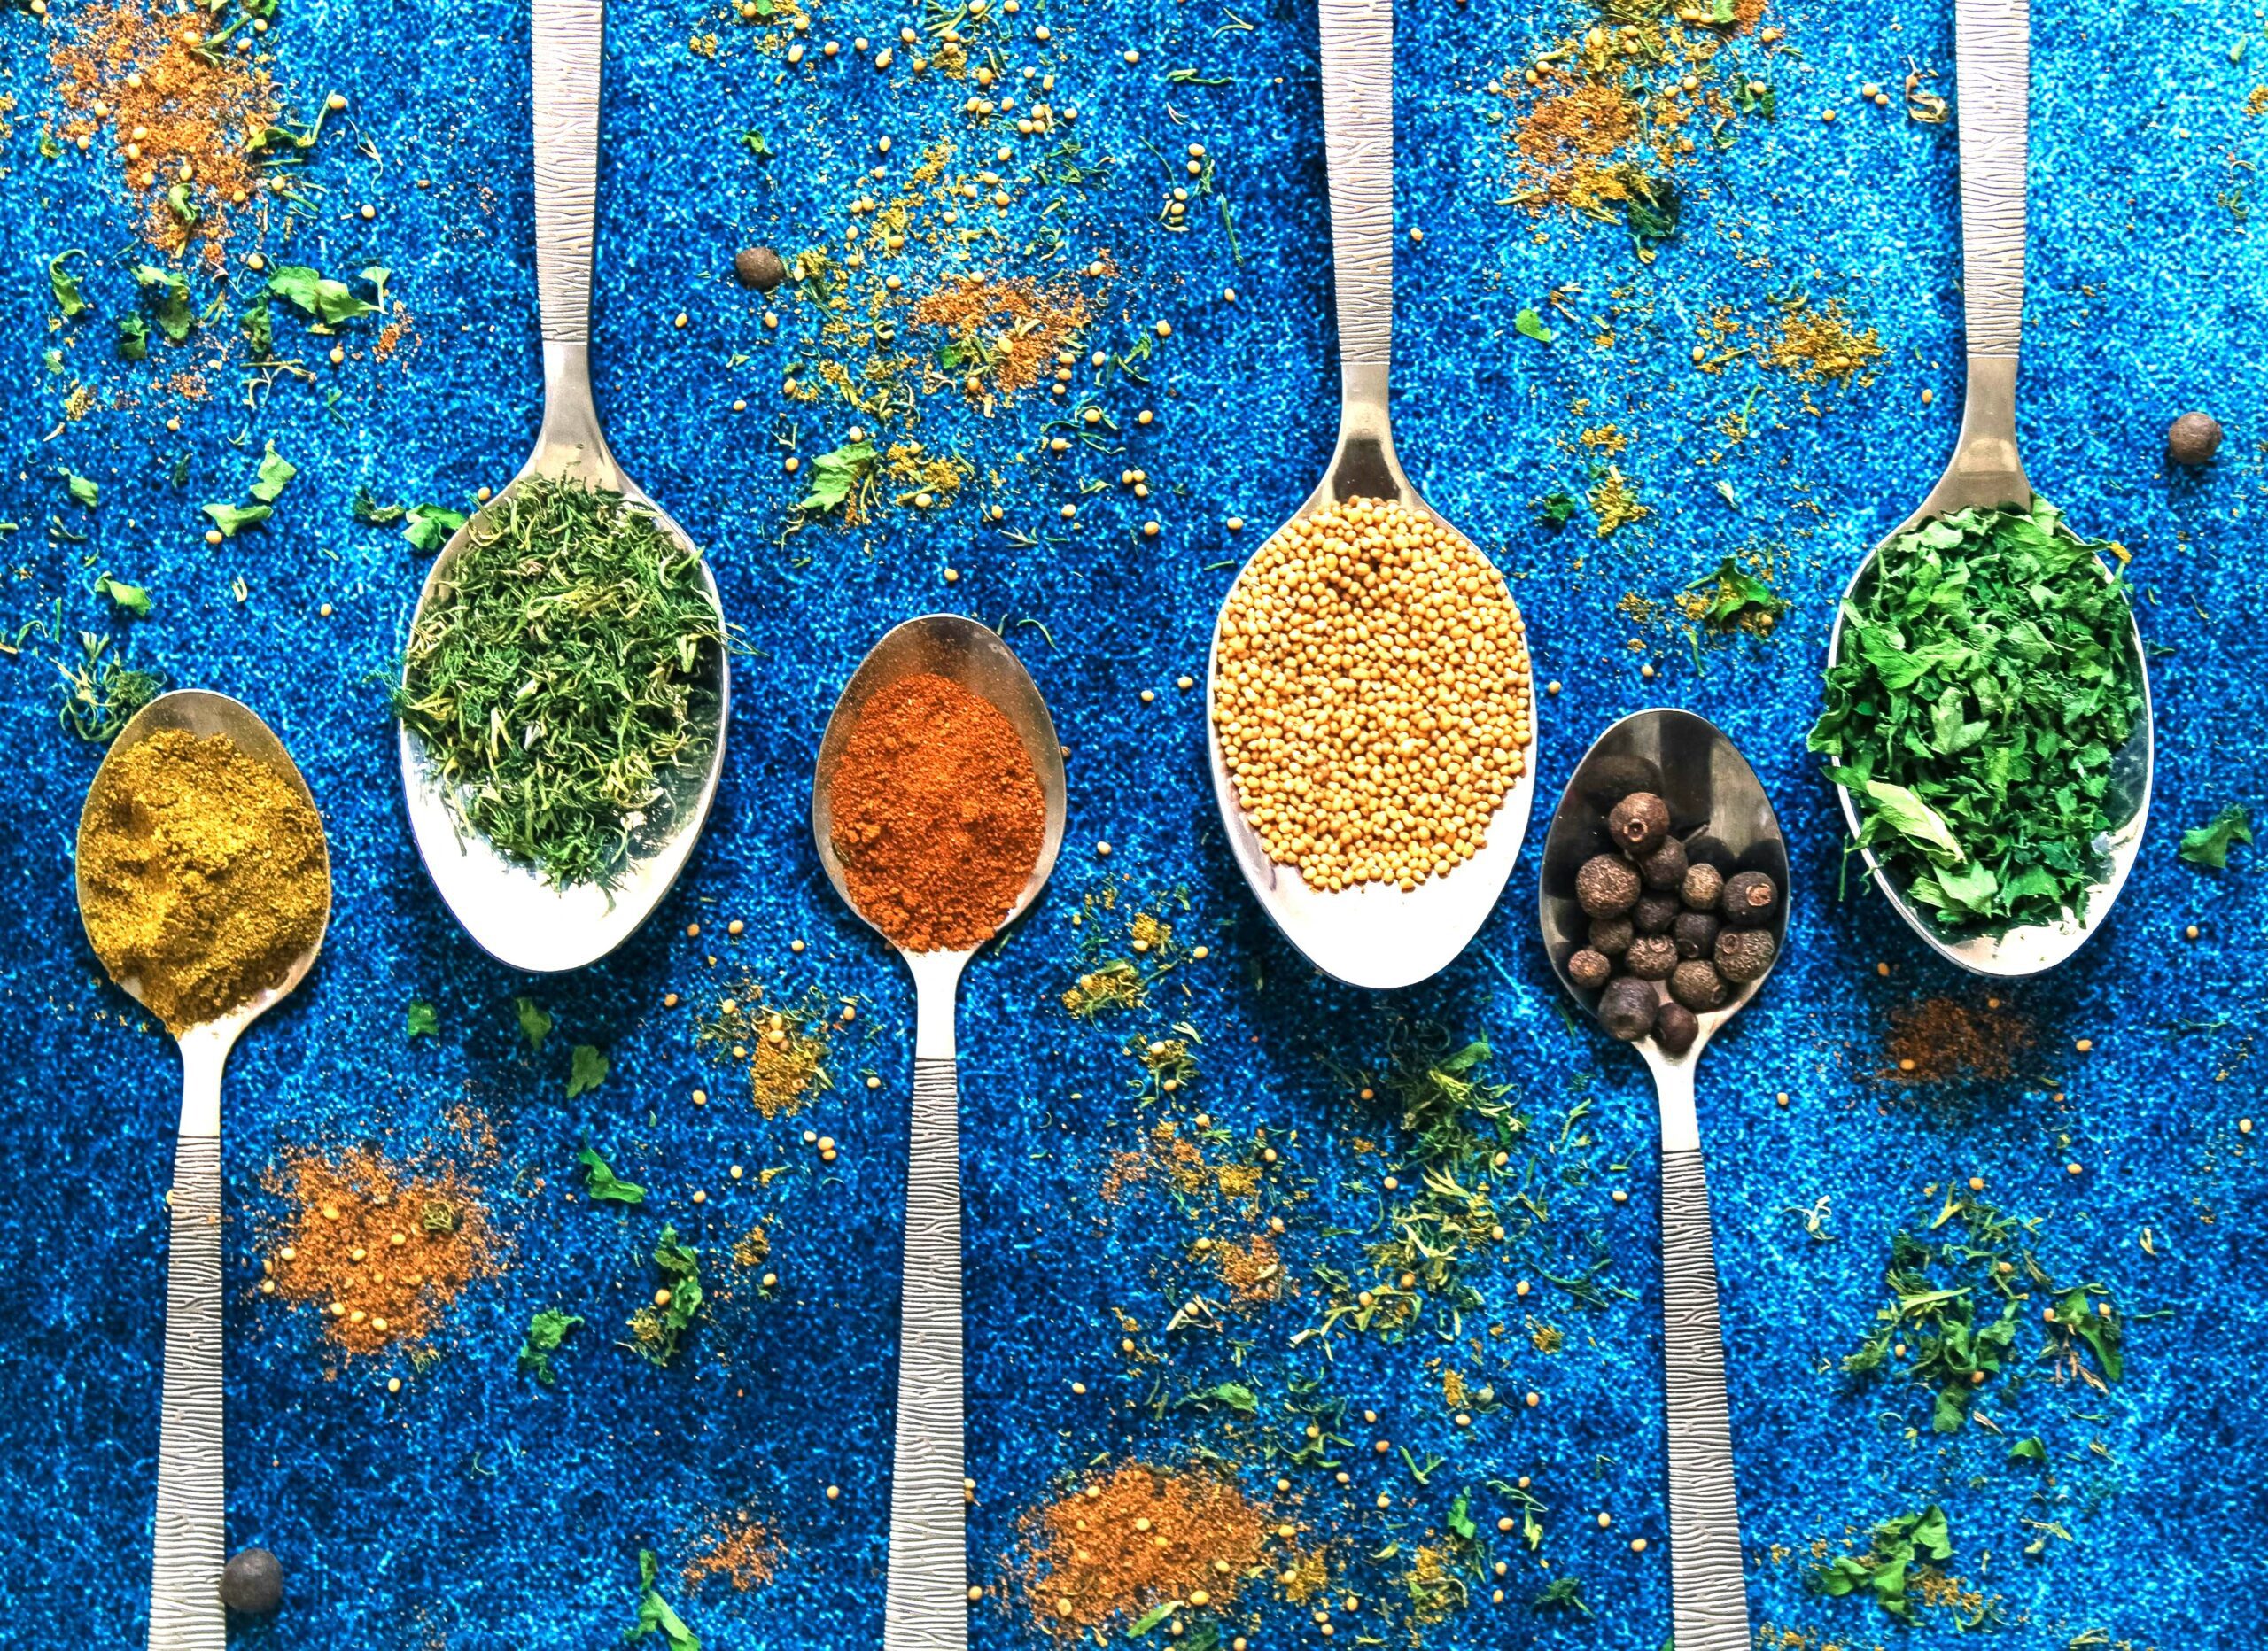 Spices add flavour to our dishes from around the world.